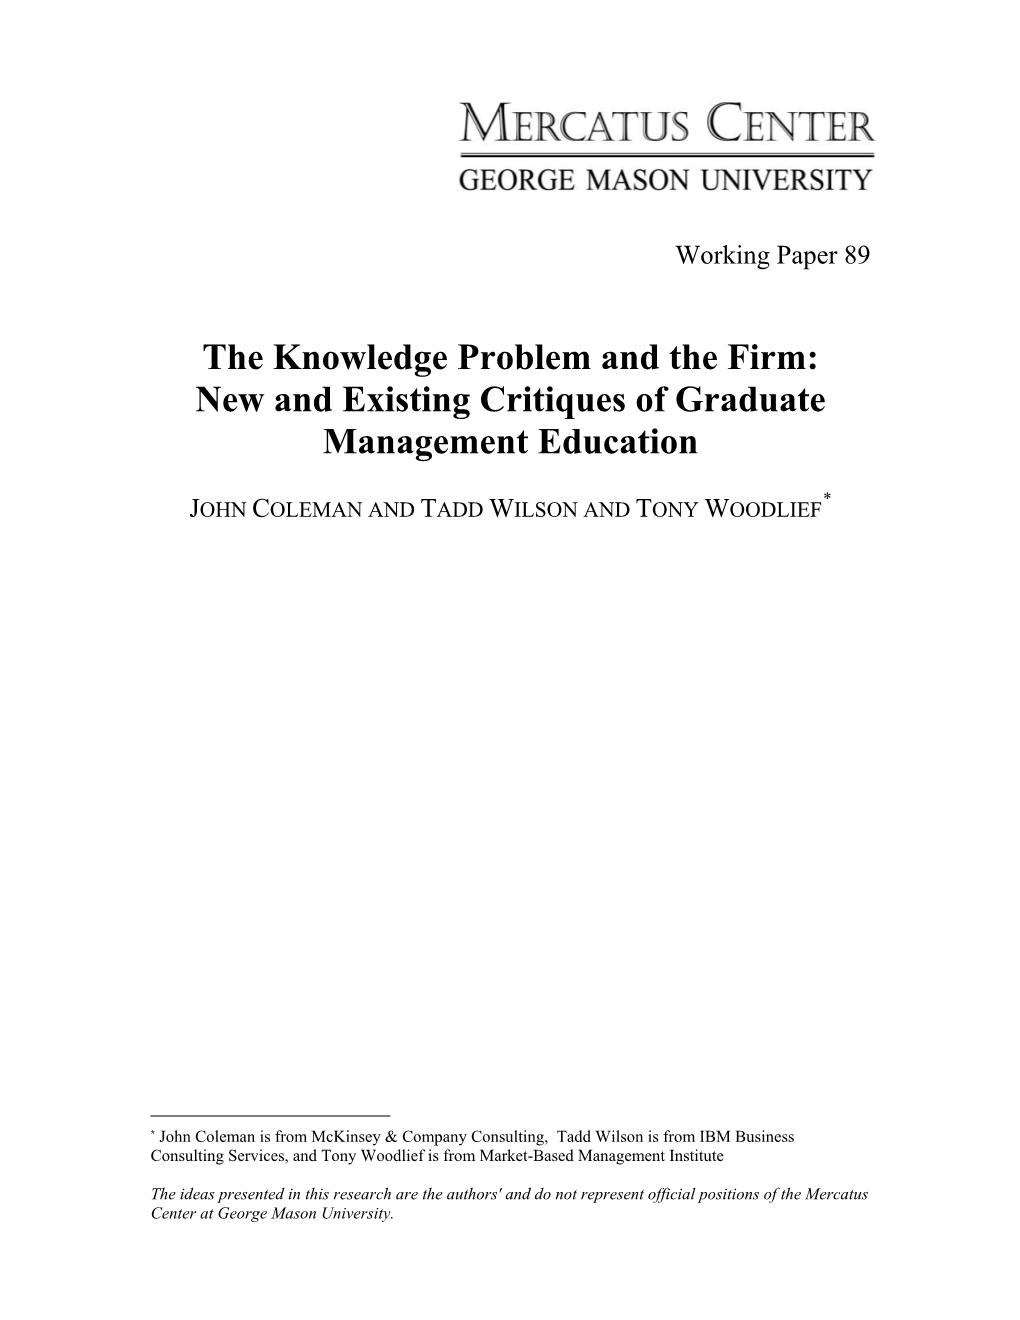 The Knowledge Problem and the Firm: New and Existing Critiques of Graduate Management Education